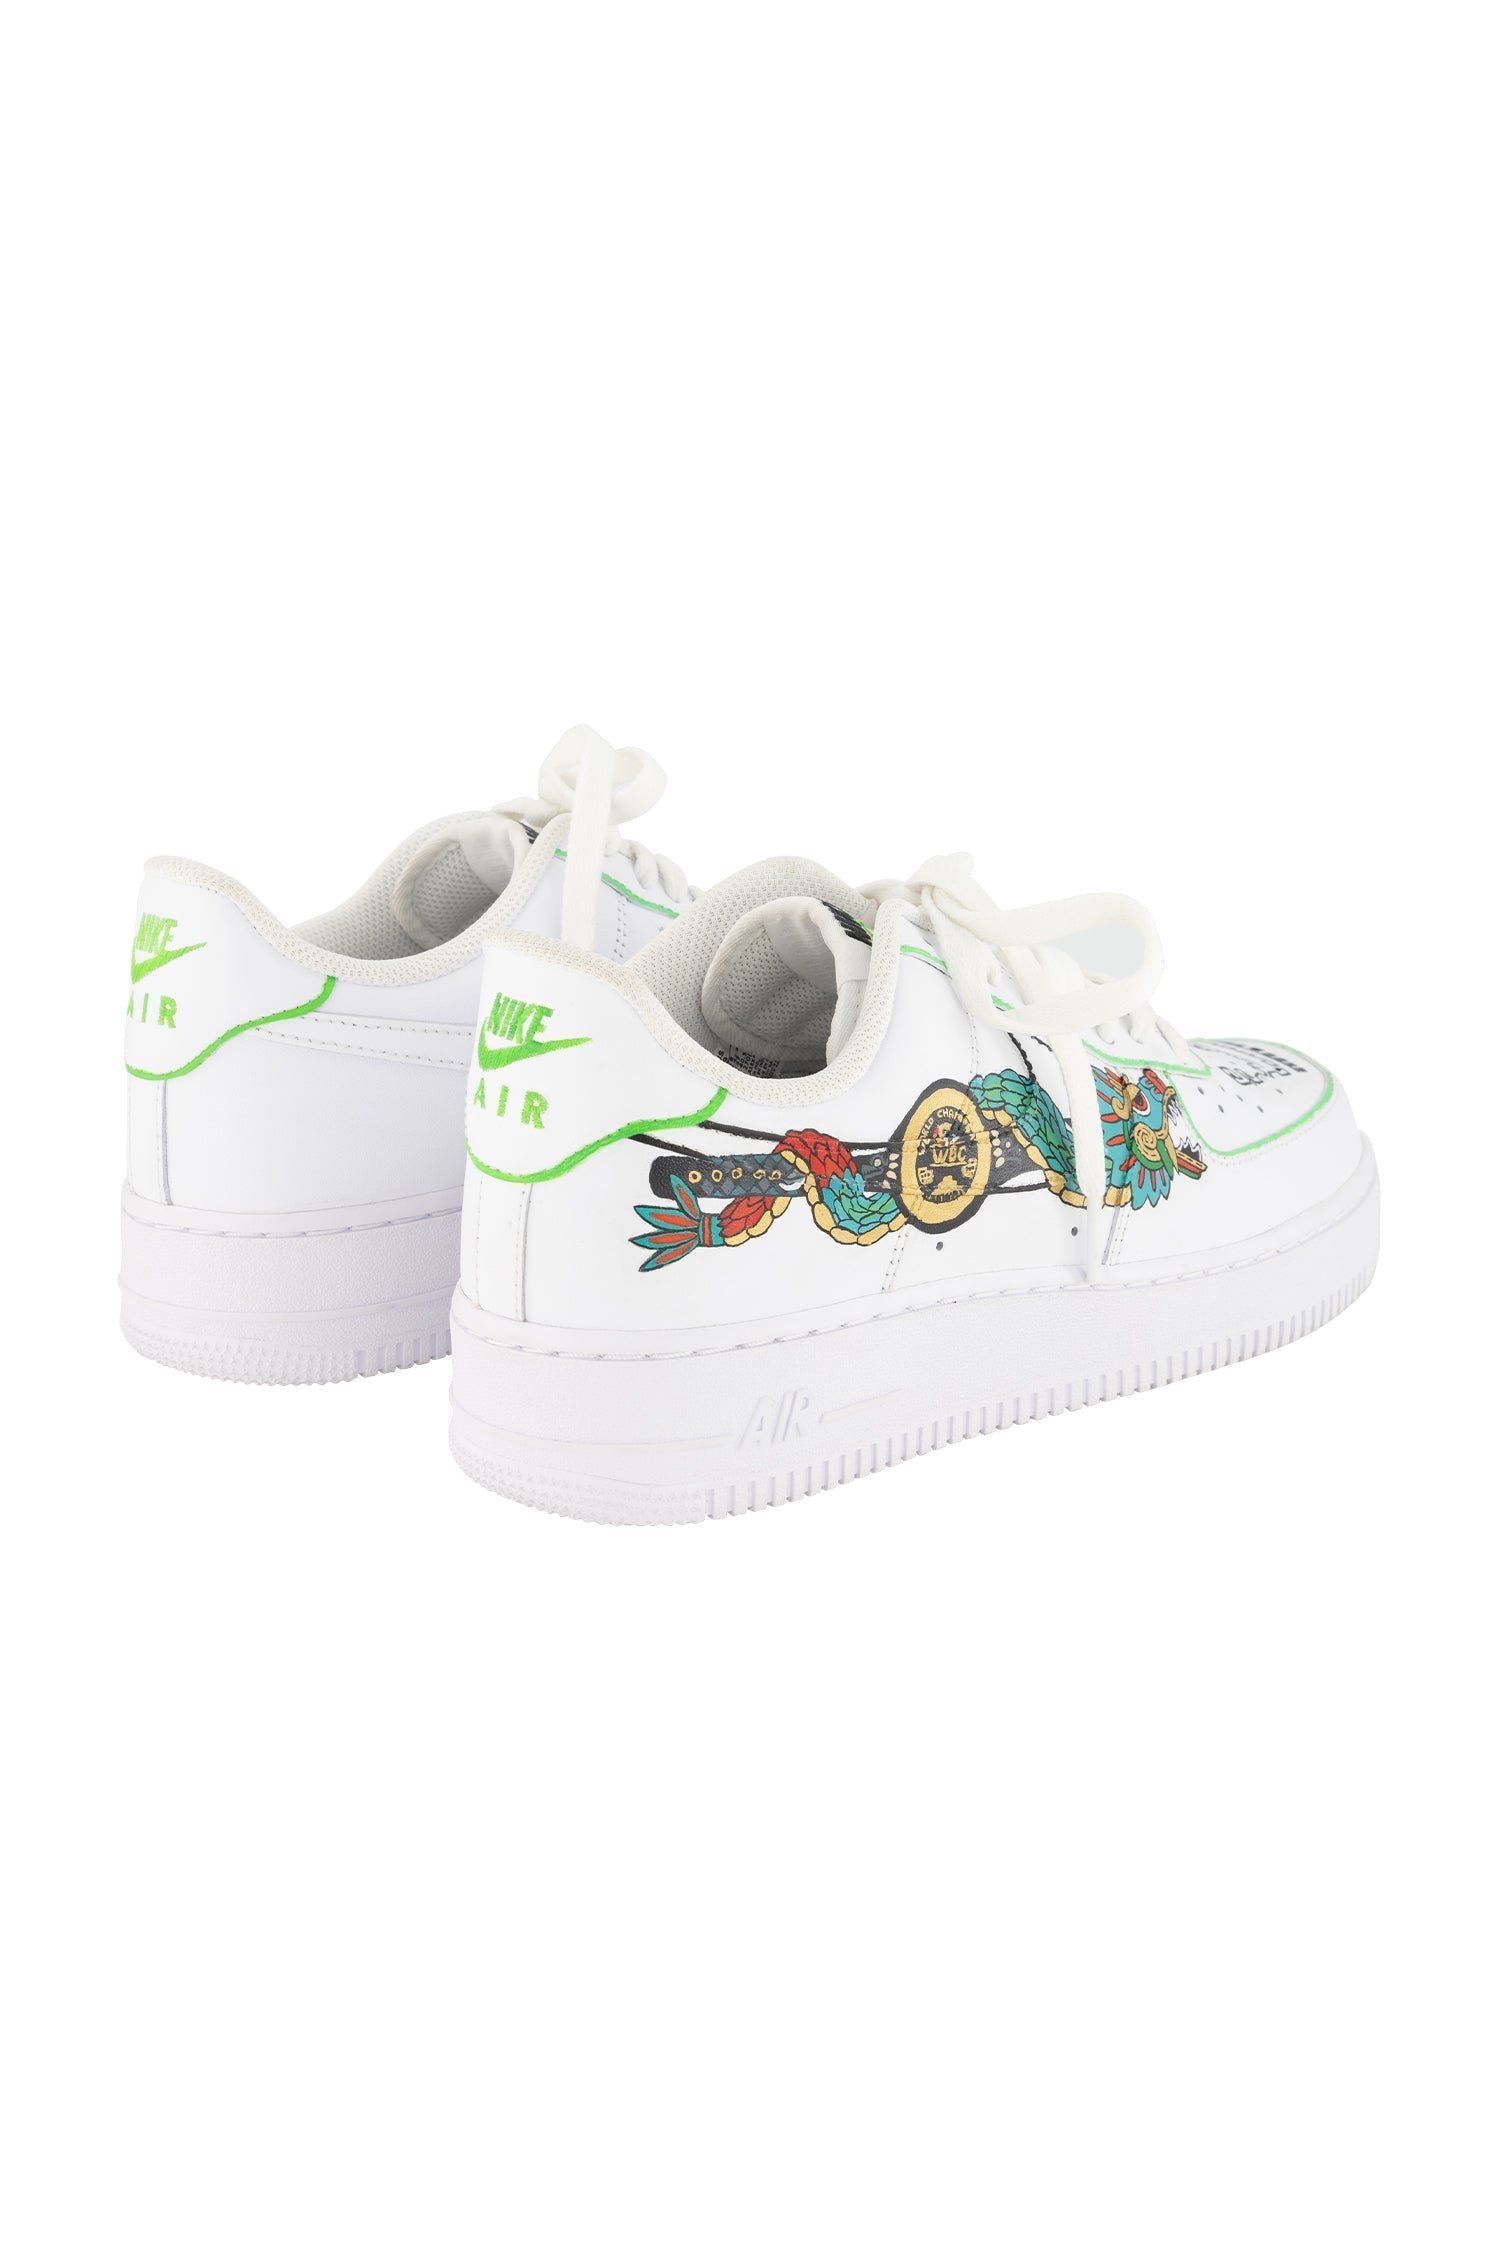 WBC Store Nike Air Force 1 Special Edition WBC Teotihuacan Belt